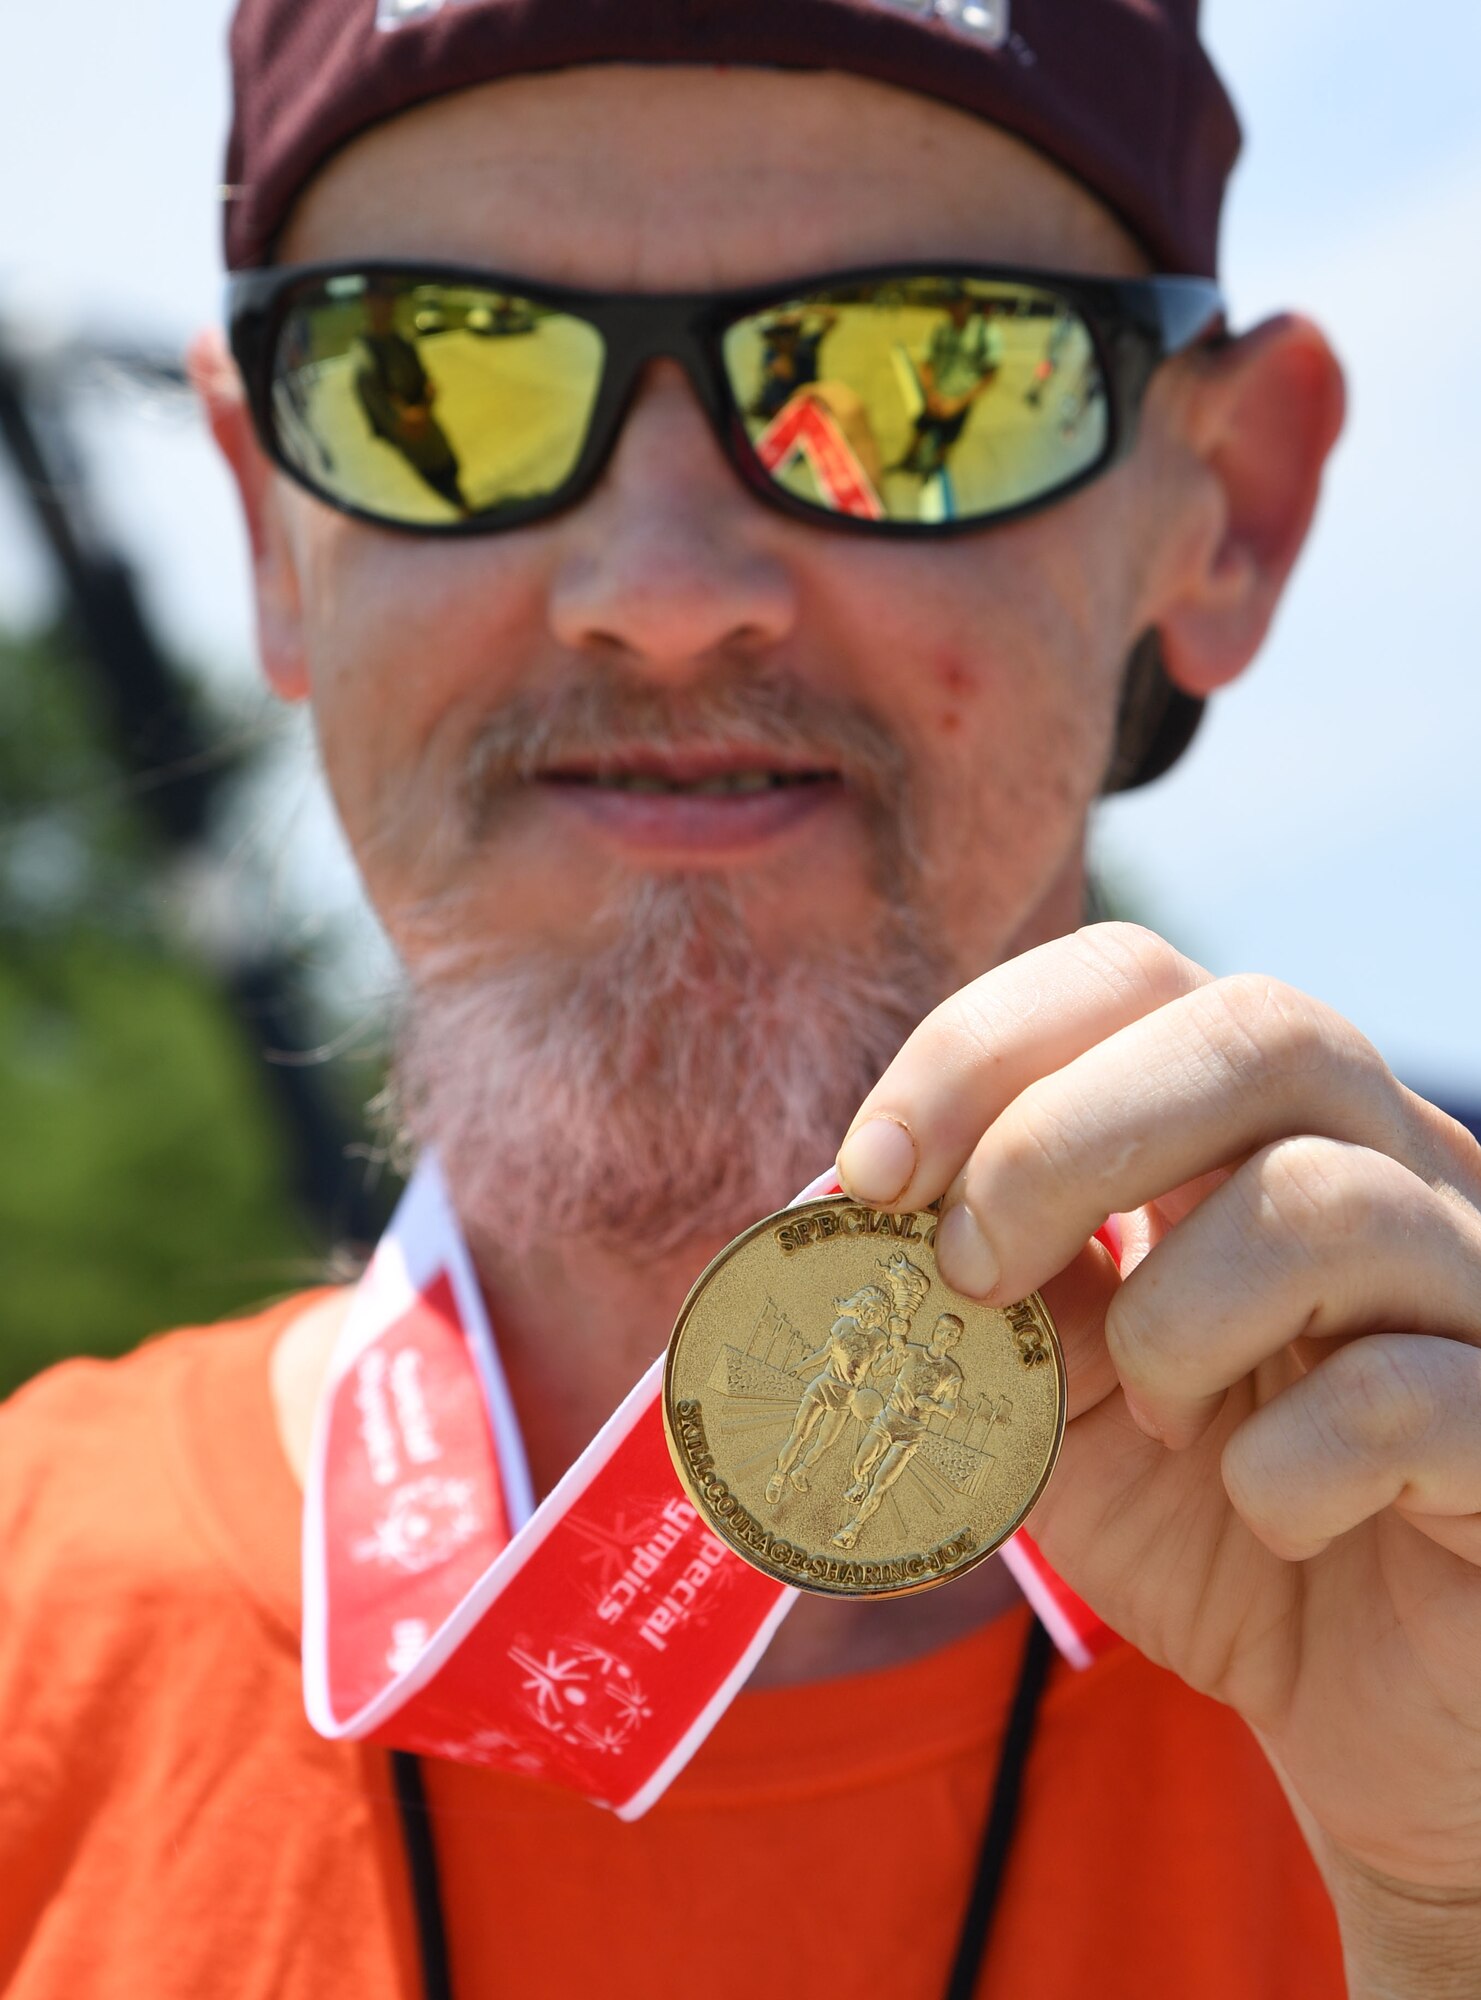 Kevin Boatwright, Area 8 athlete, displays his gold medal during the Special Olympics Mississippi Summer Games at Keesler Air Force Base, Miss., May 14, 2022. Over 600 athletes participated in the Summer Games. (U.S. Air Force photo by Kemberly Groue)